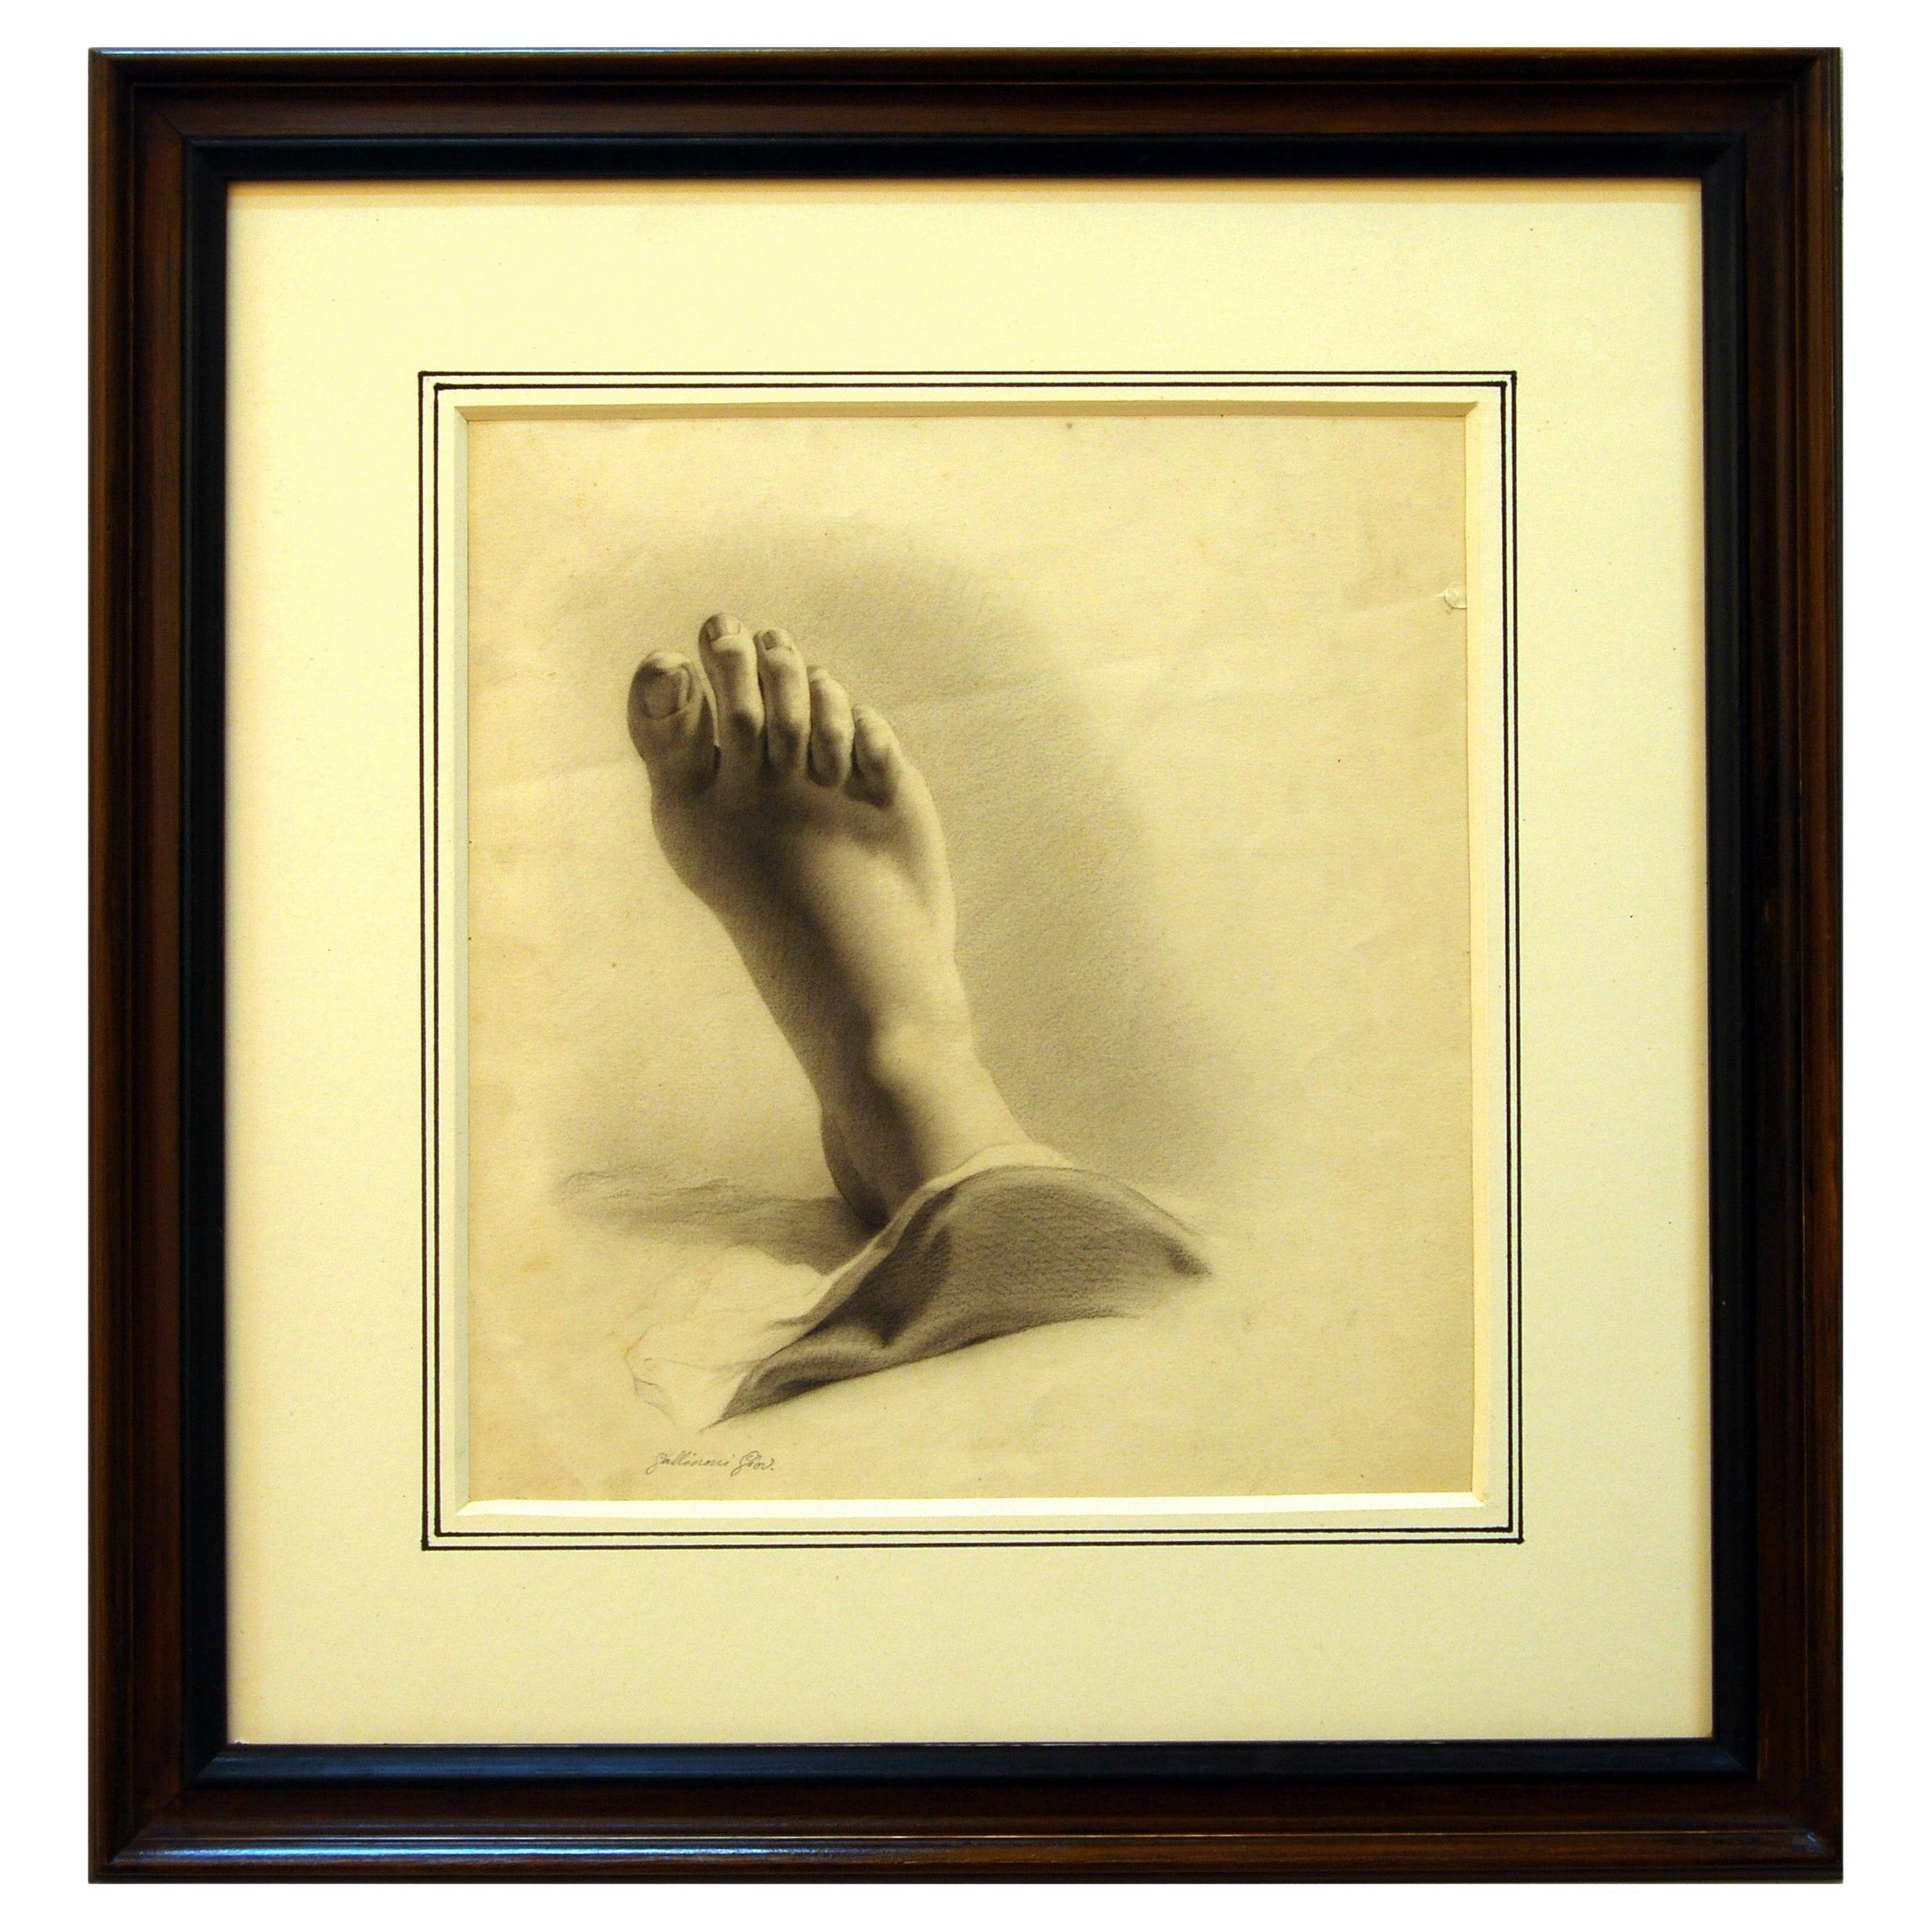 Study of a Right Foot, Pencil Drawing Signed Gallinoni